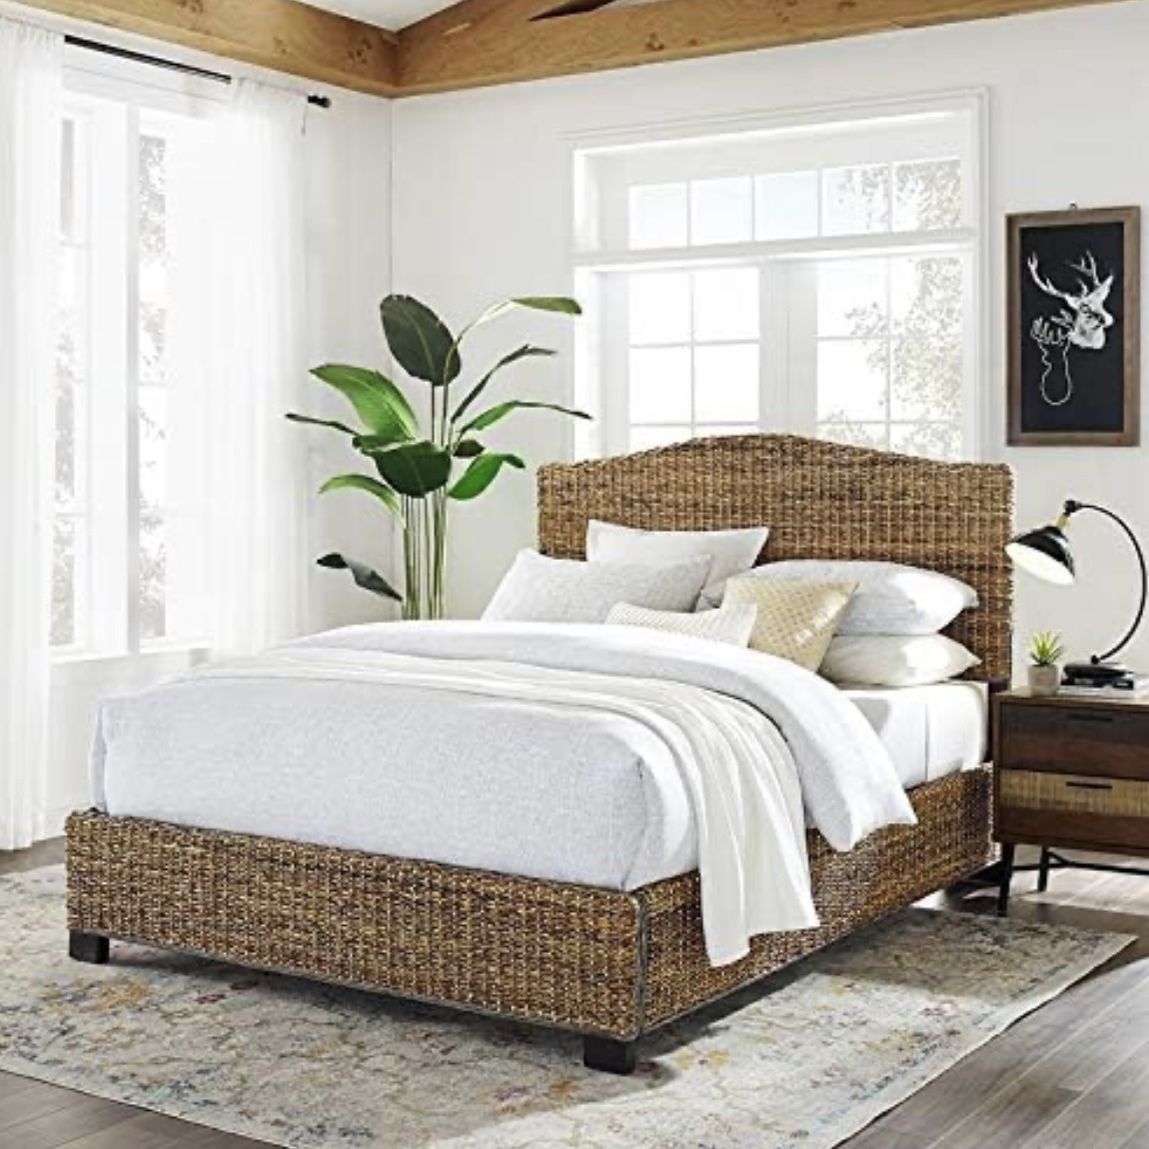 B-105 Farmhouse Wood/Banana Leaf Queen Panel Bed in Natural